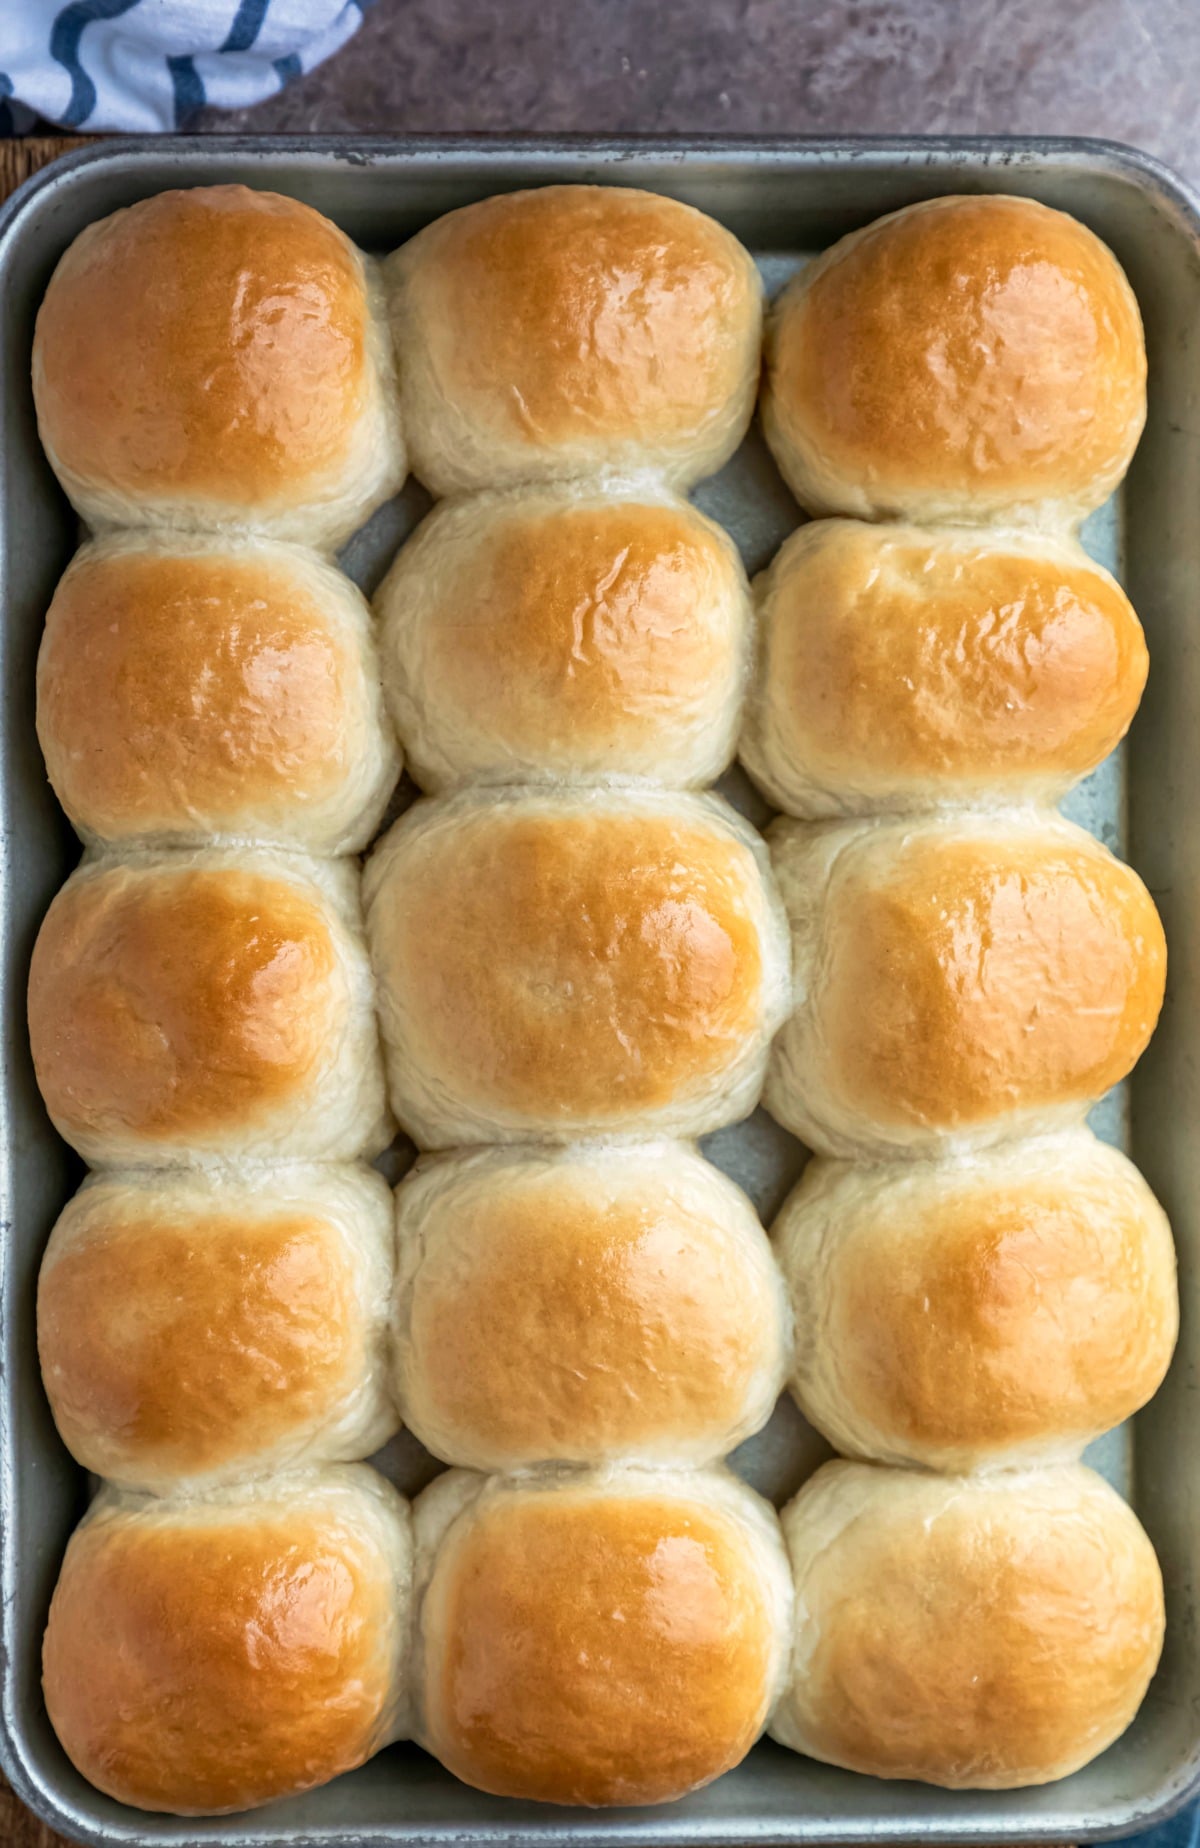 Overhead view of tray with 15 dinner rolls in it